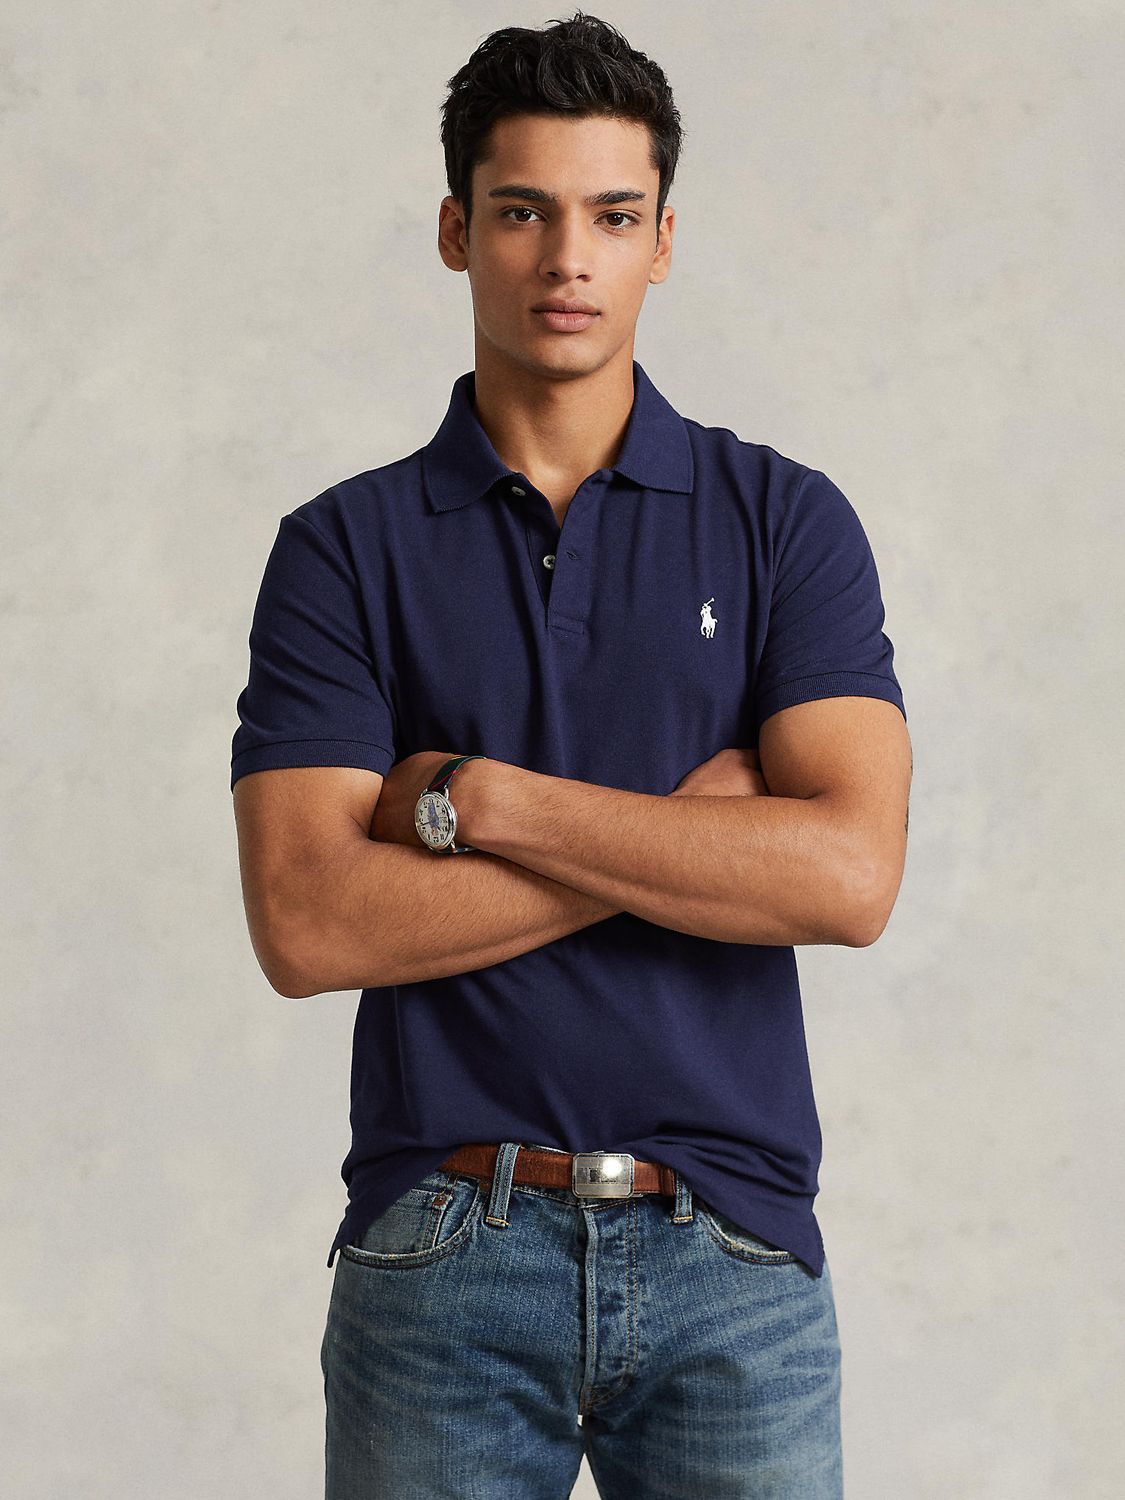 Polo Golf by Ralph Lauren Polo Shirt, French Navy, S